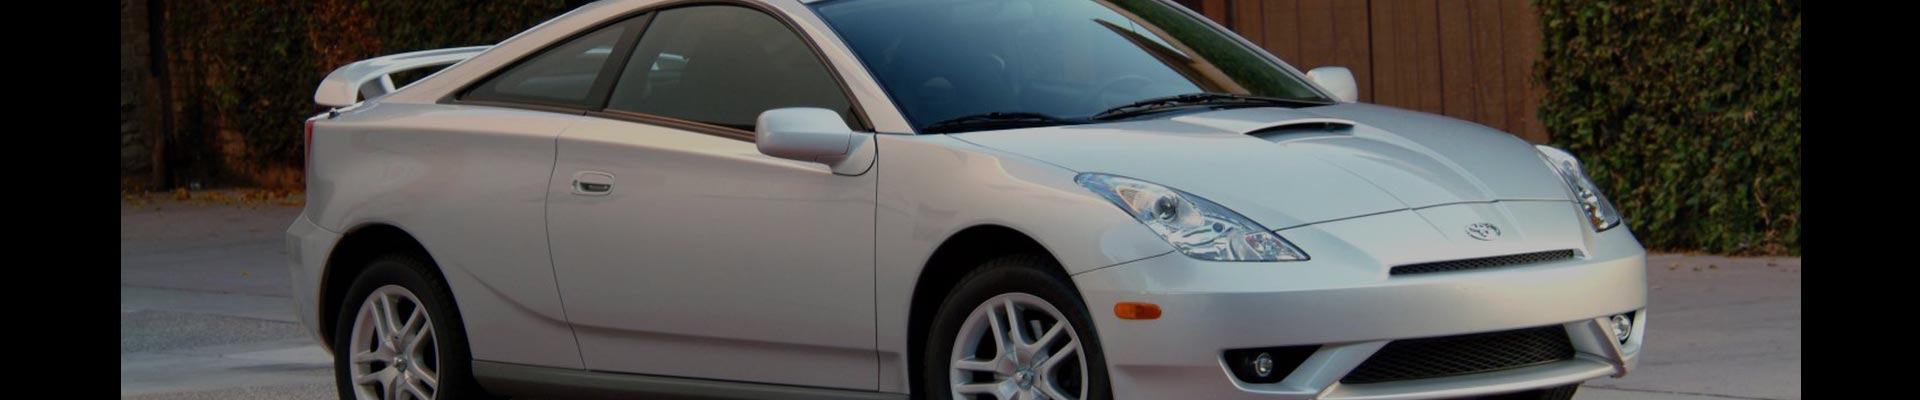 Shop Replacement and OEM 1995 Toyota Celica Parts with Discounted Price on the Net